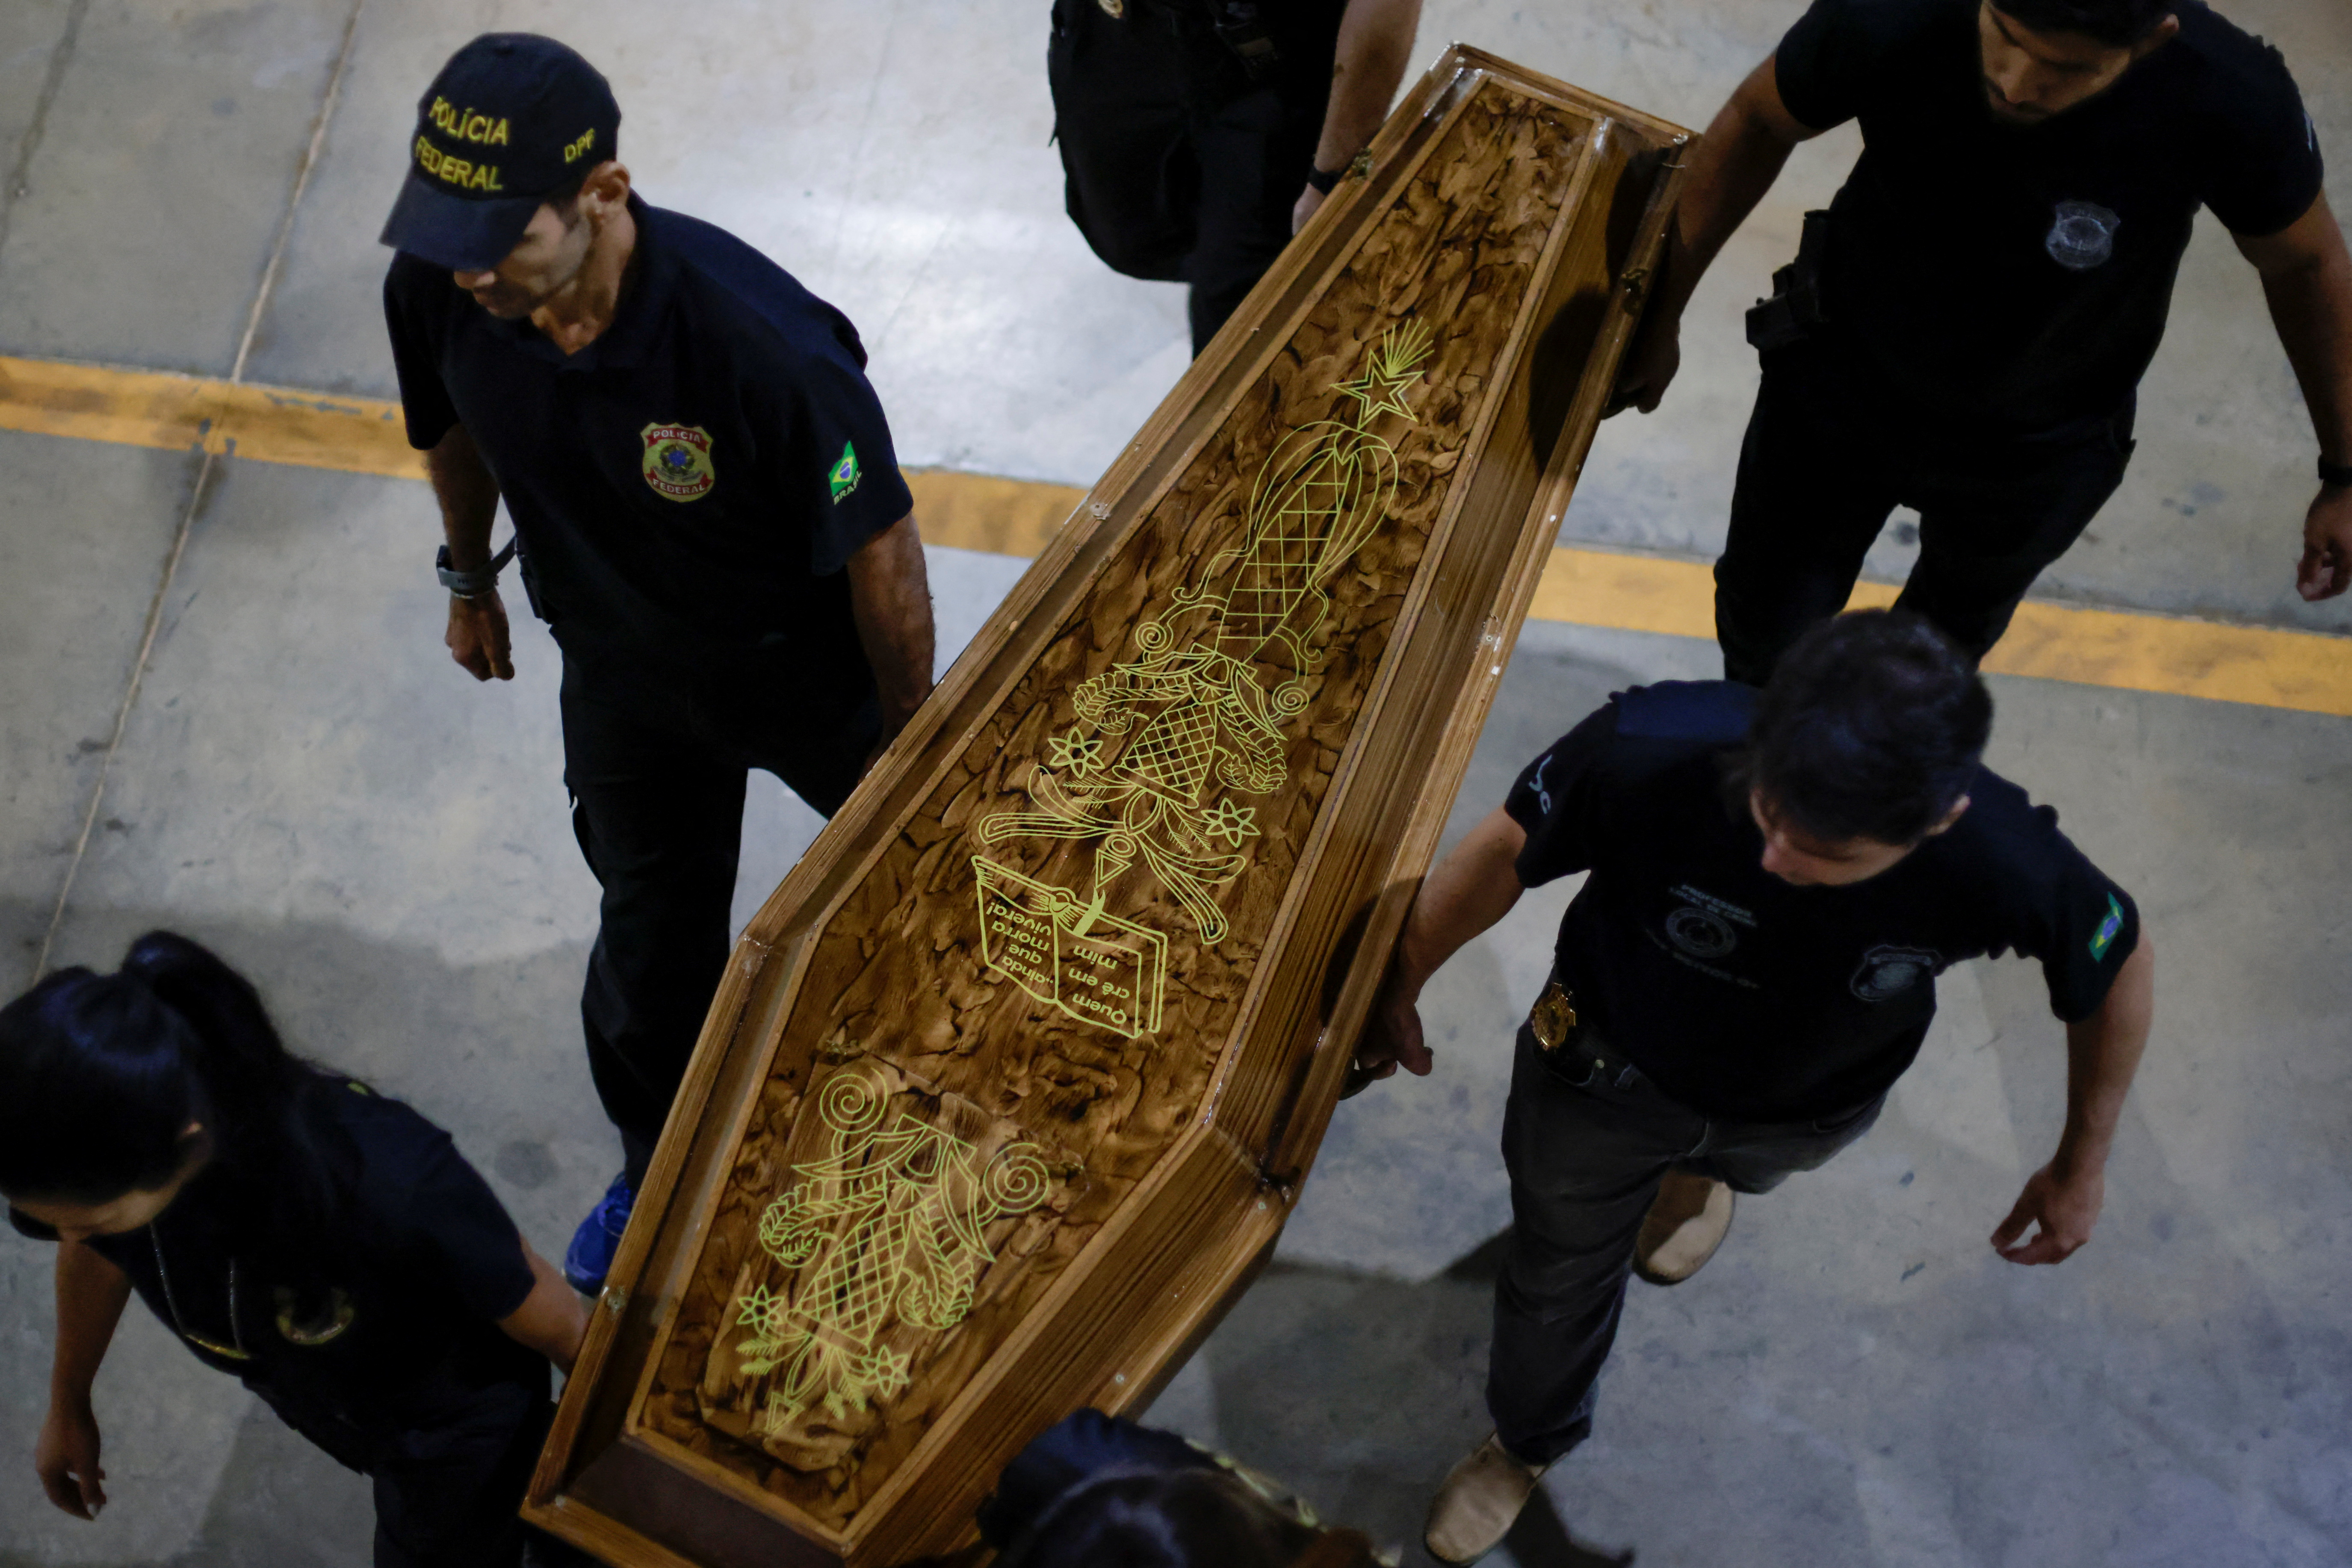 Federal police officers carry a coffin containing human remains after a suspect confessed to killing British journalist Dom Phillips and Brazilian indigenous expert Bruno Pereira, in Brasilia